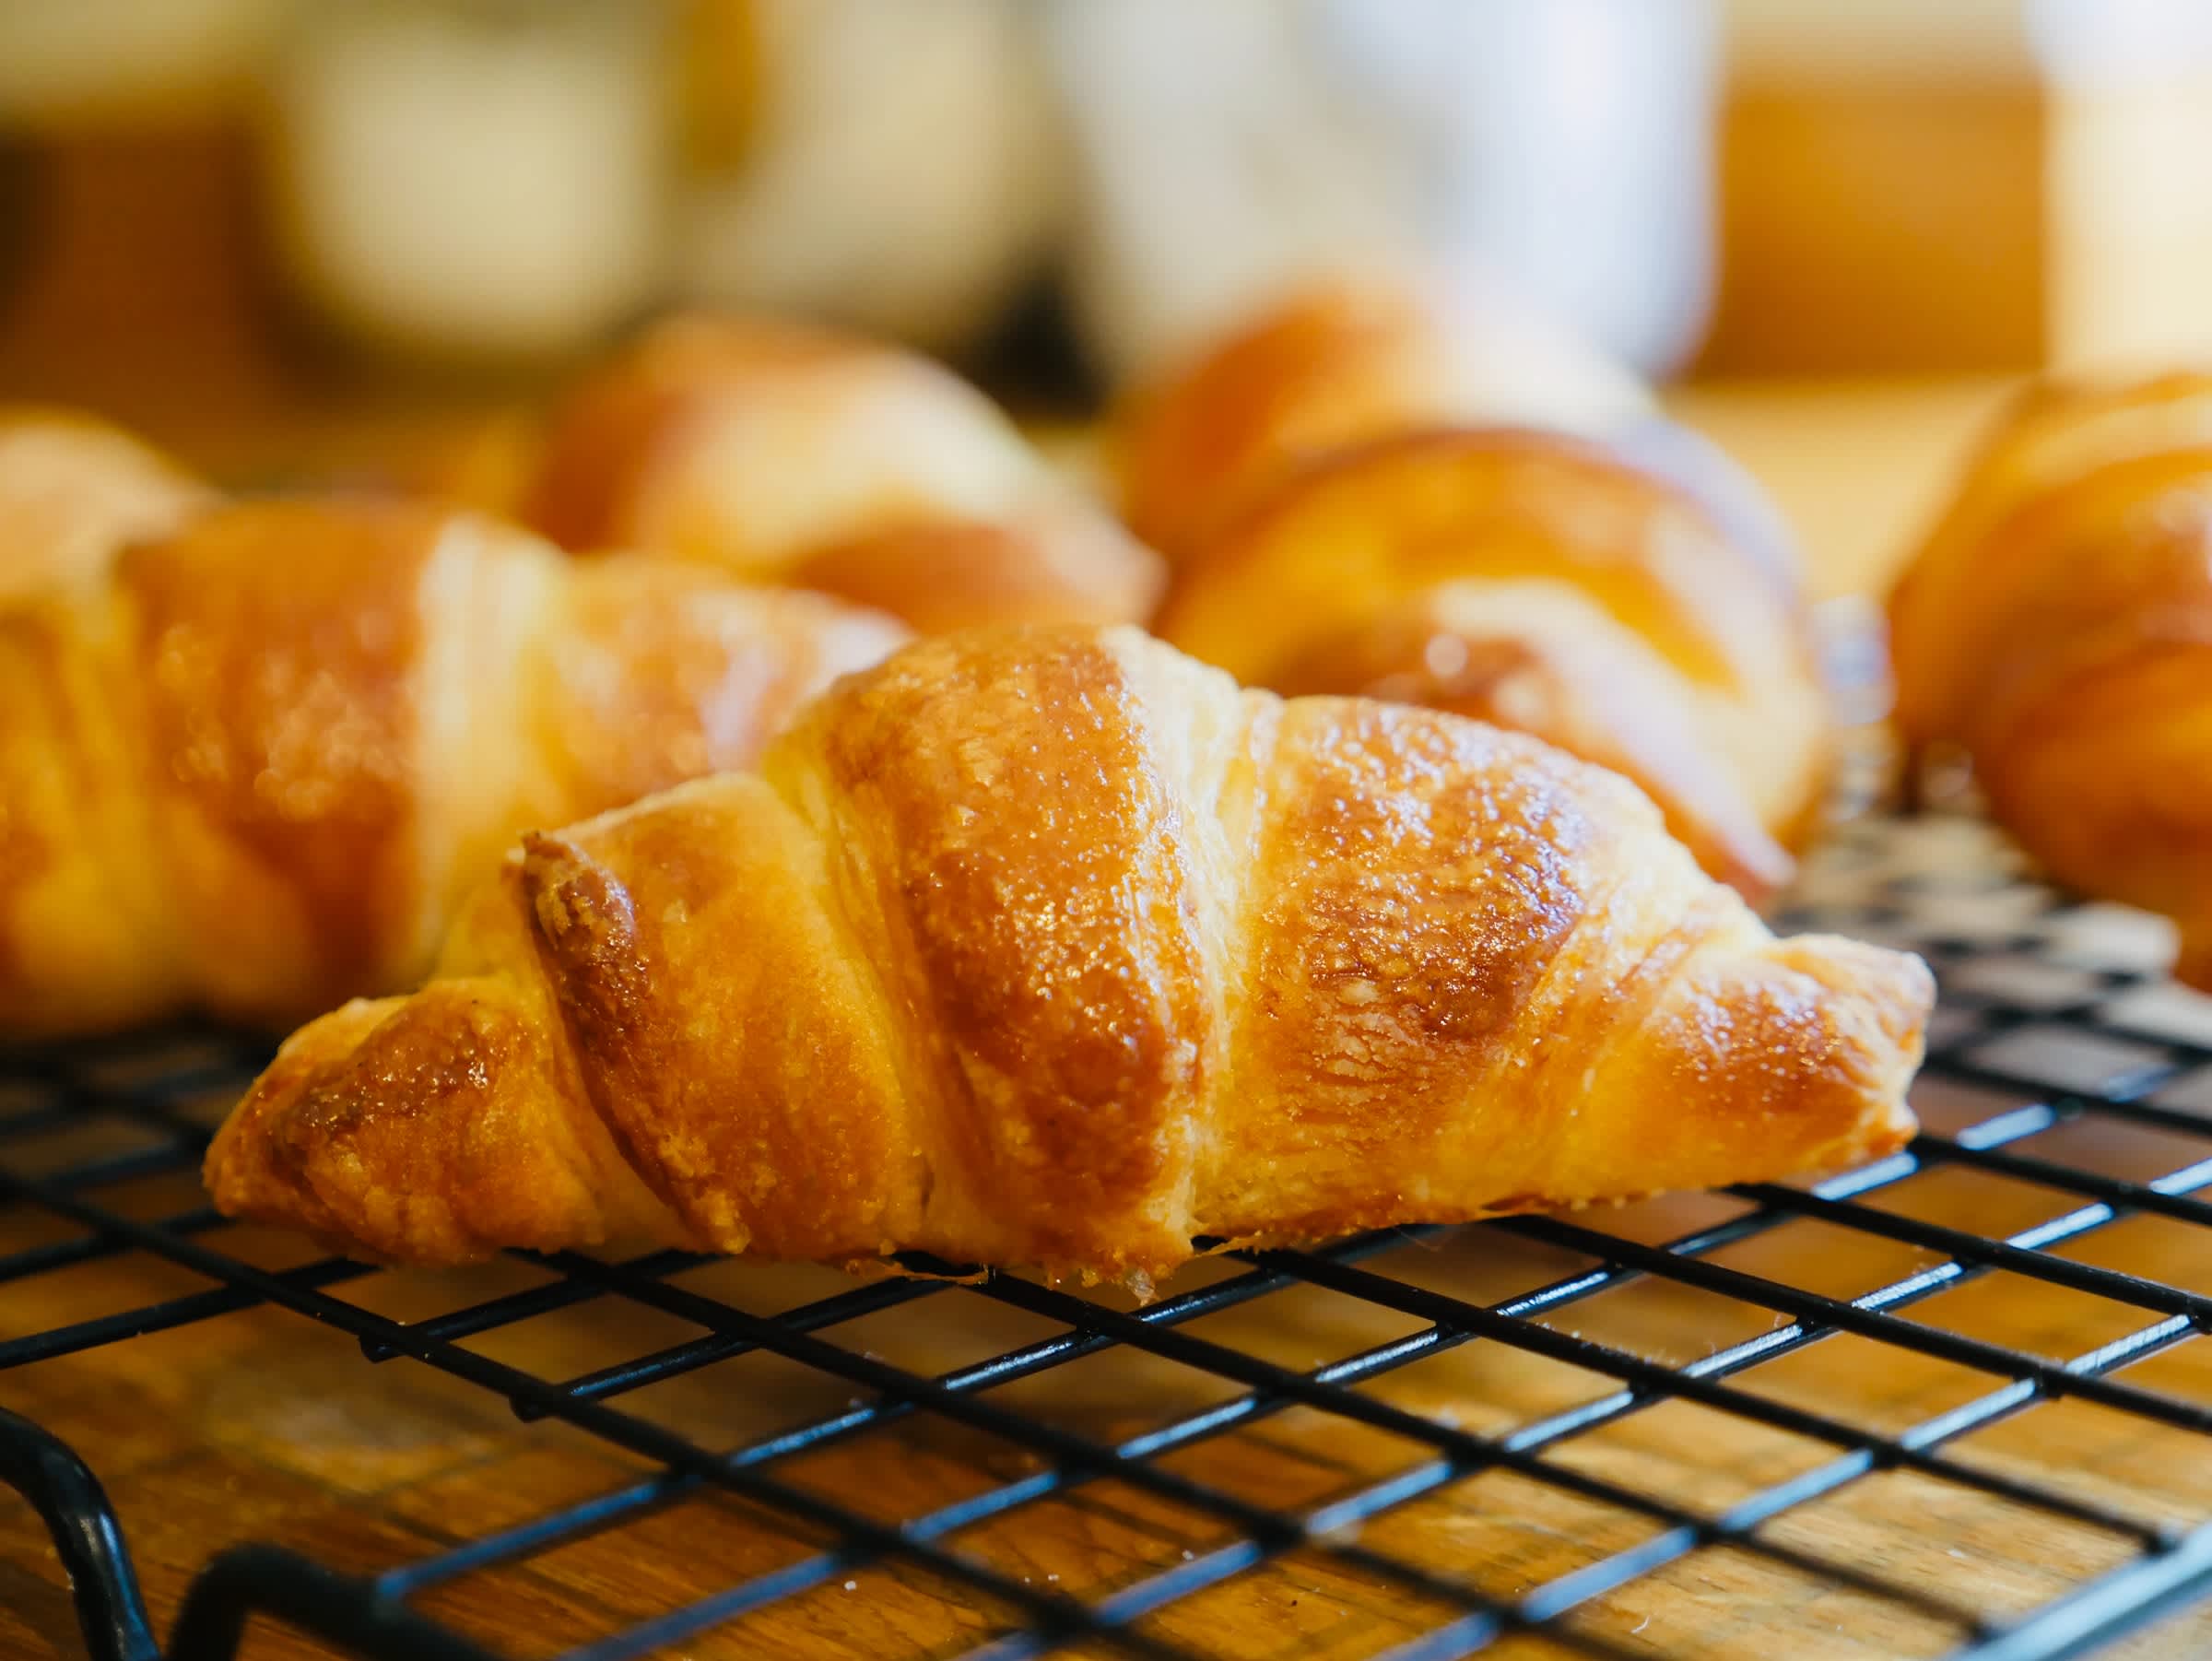 624f42149537cabfd8a61024_croissants-puff-pastry.jpg